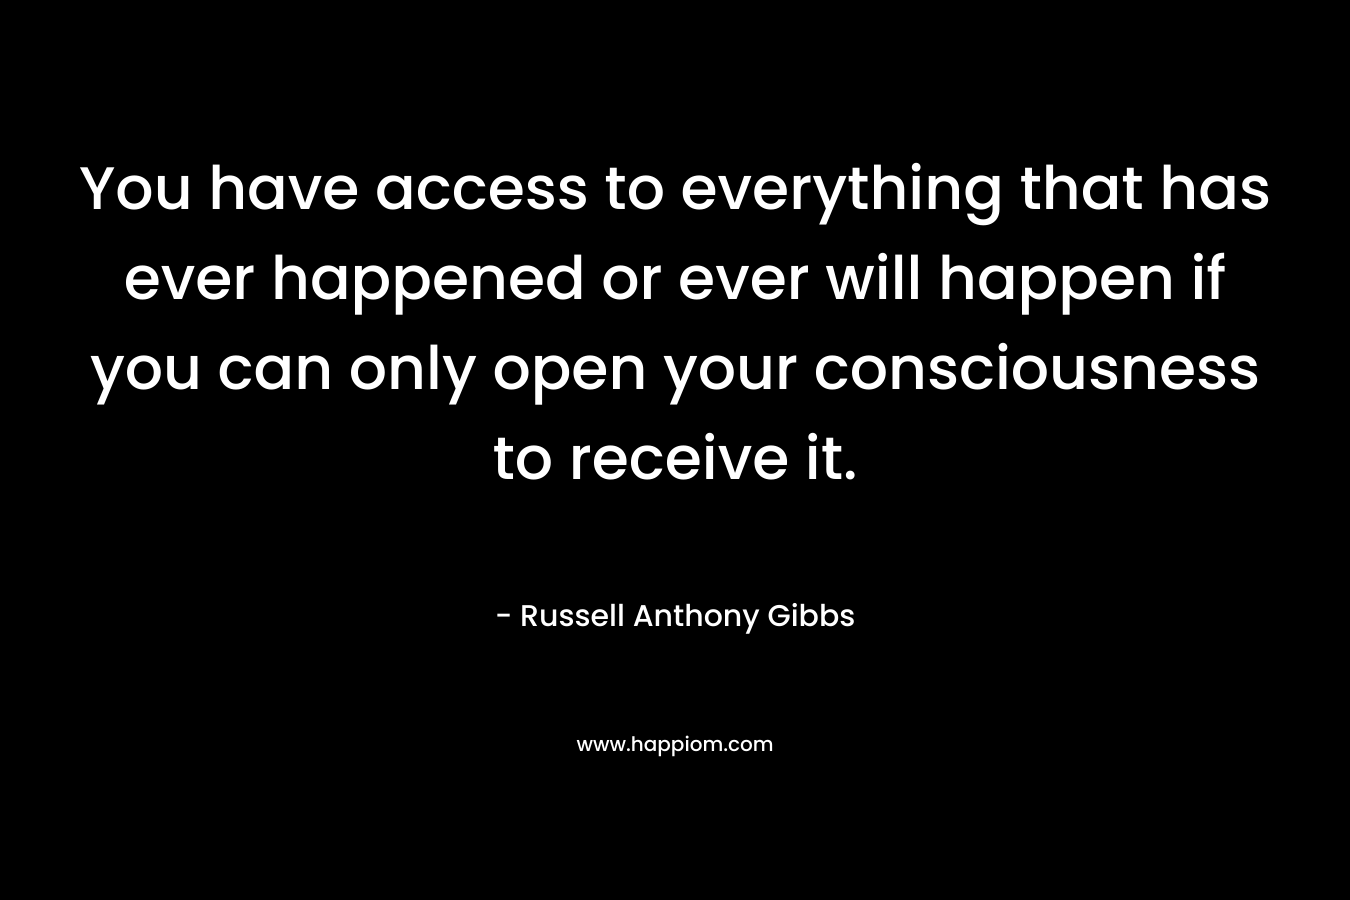 You have access to everything that has ever happened or ever will happen if you can only open your consciousness to receive it.